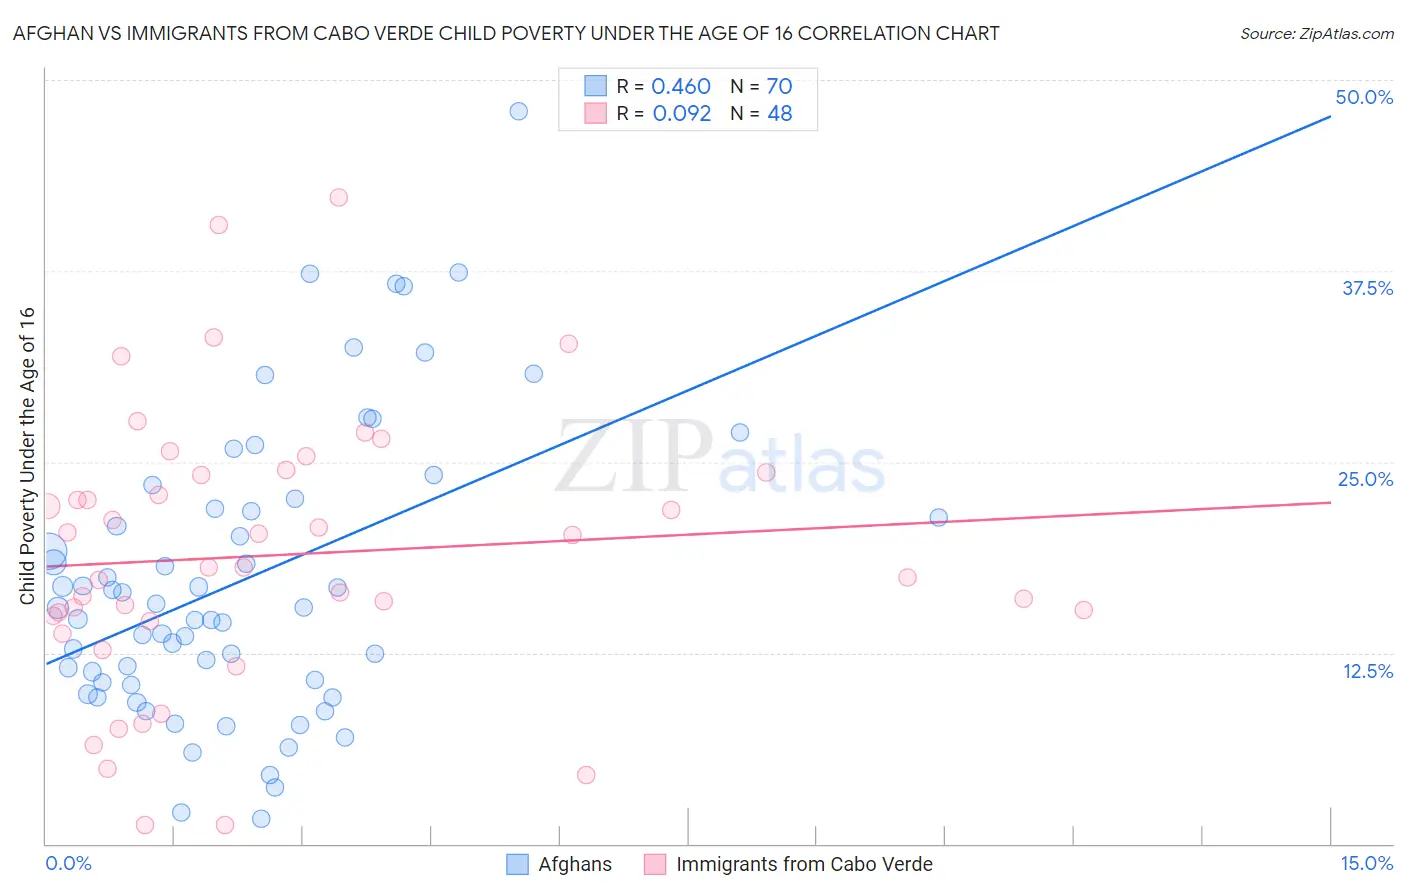 Afghan vs Immigrants from Cabo Verde Child Poverty Under the Age of 16